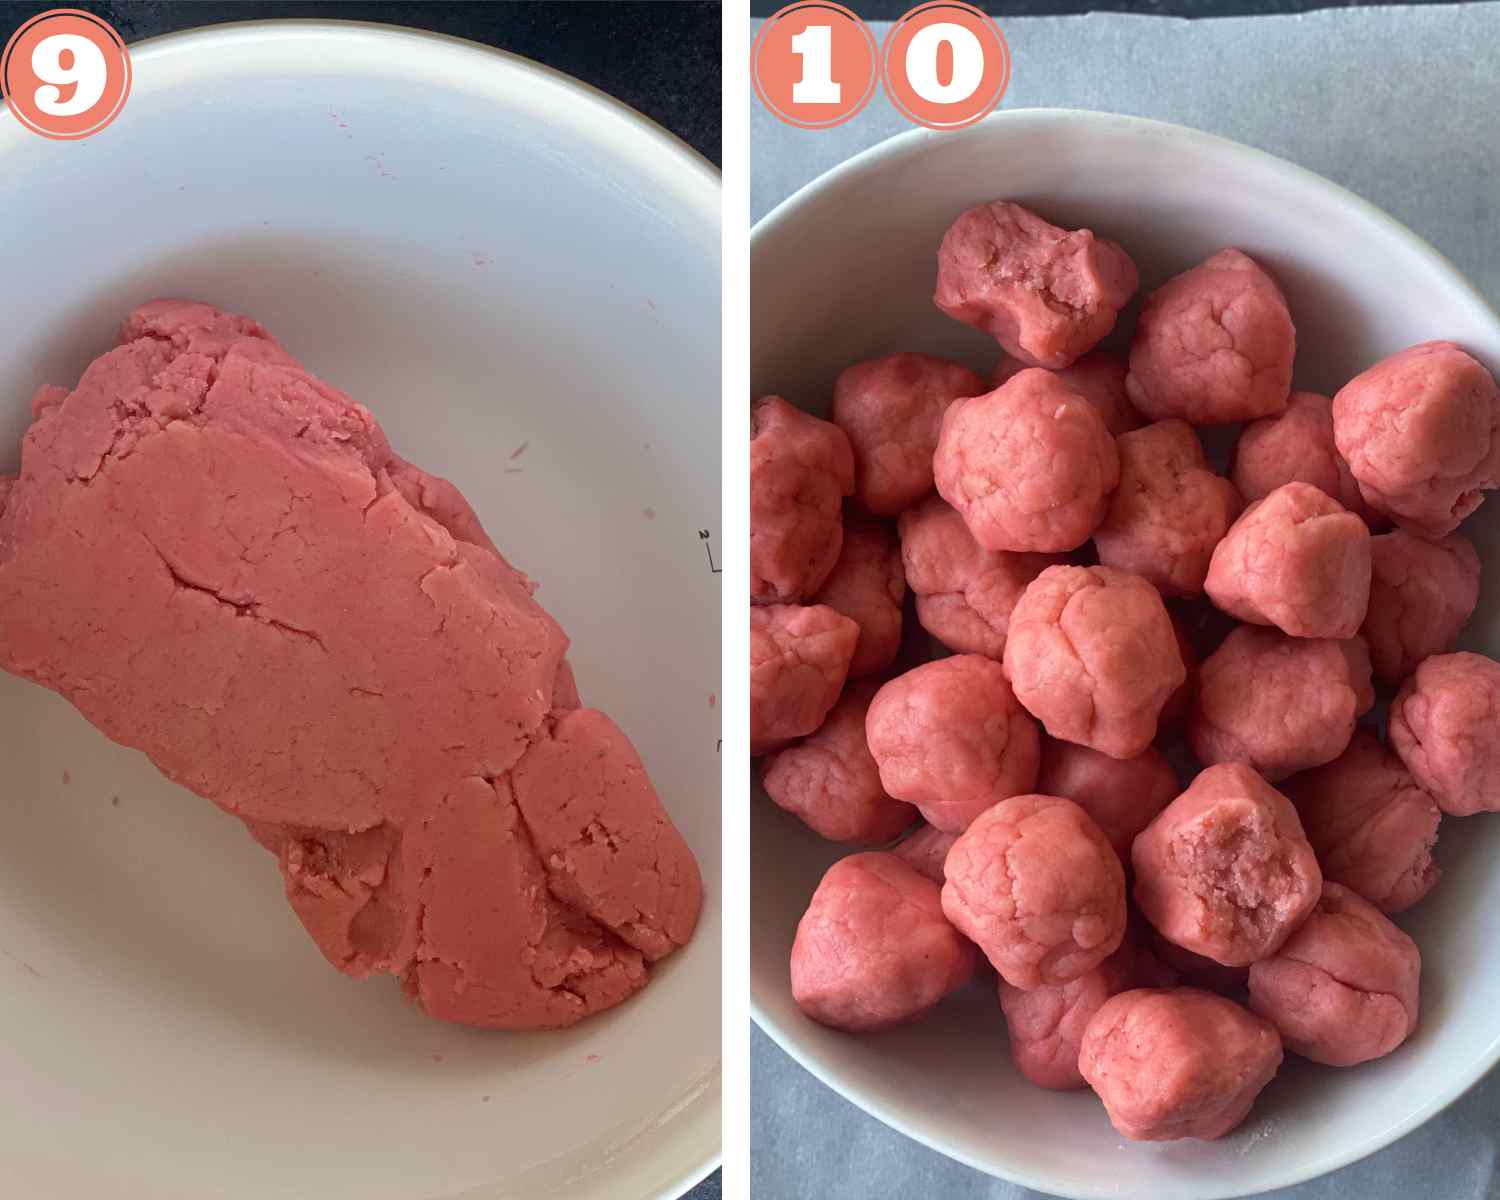 Mix till the entire dough is pink in color and make small even size balls using it.